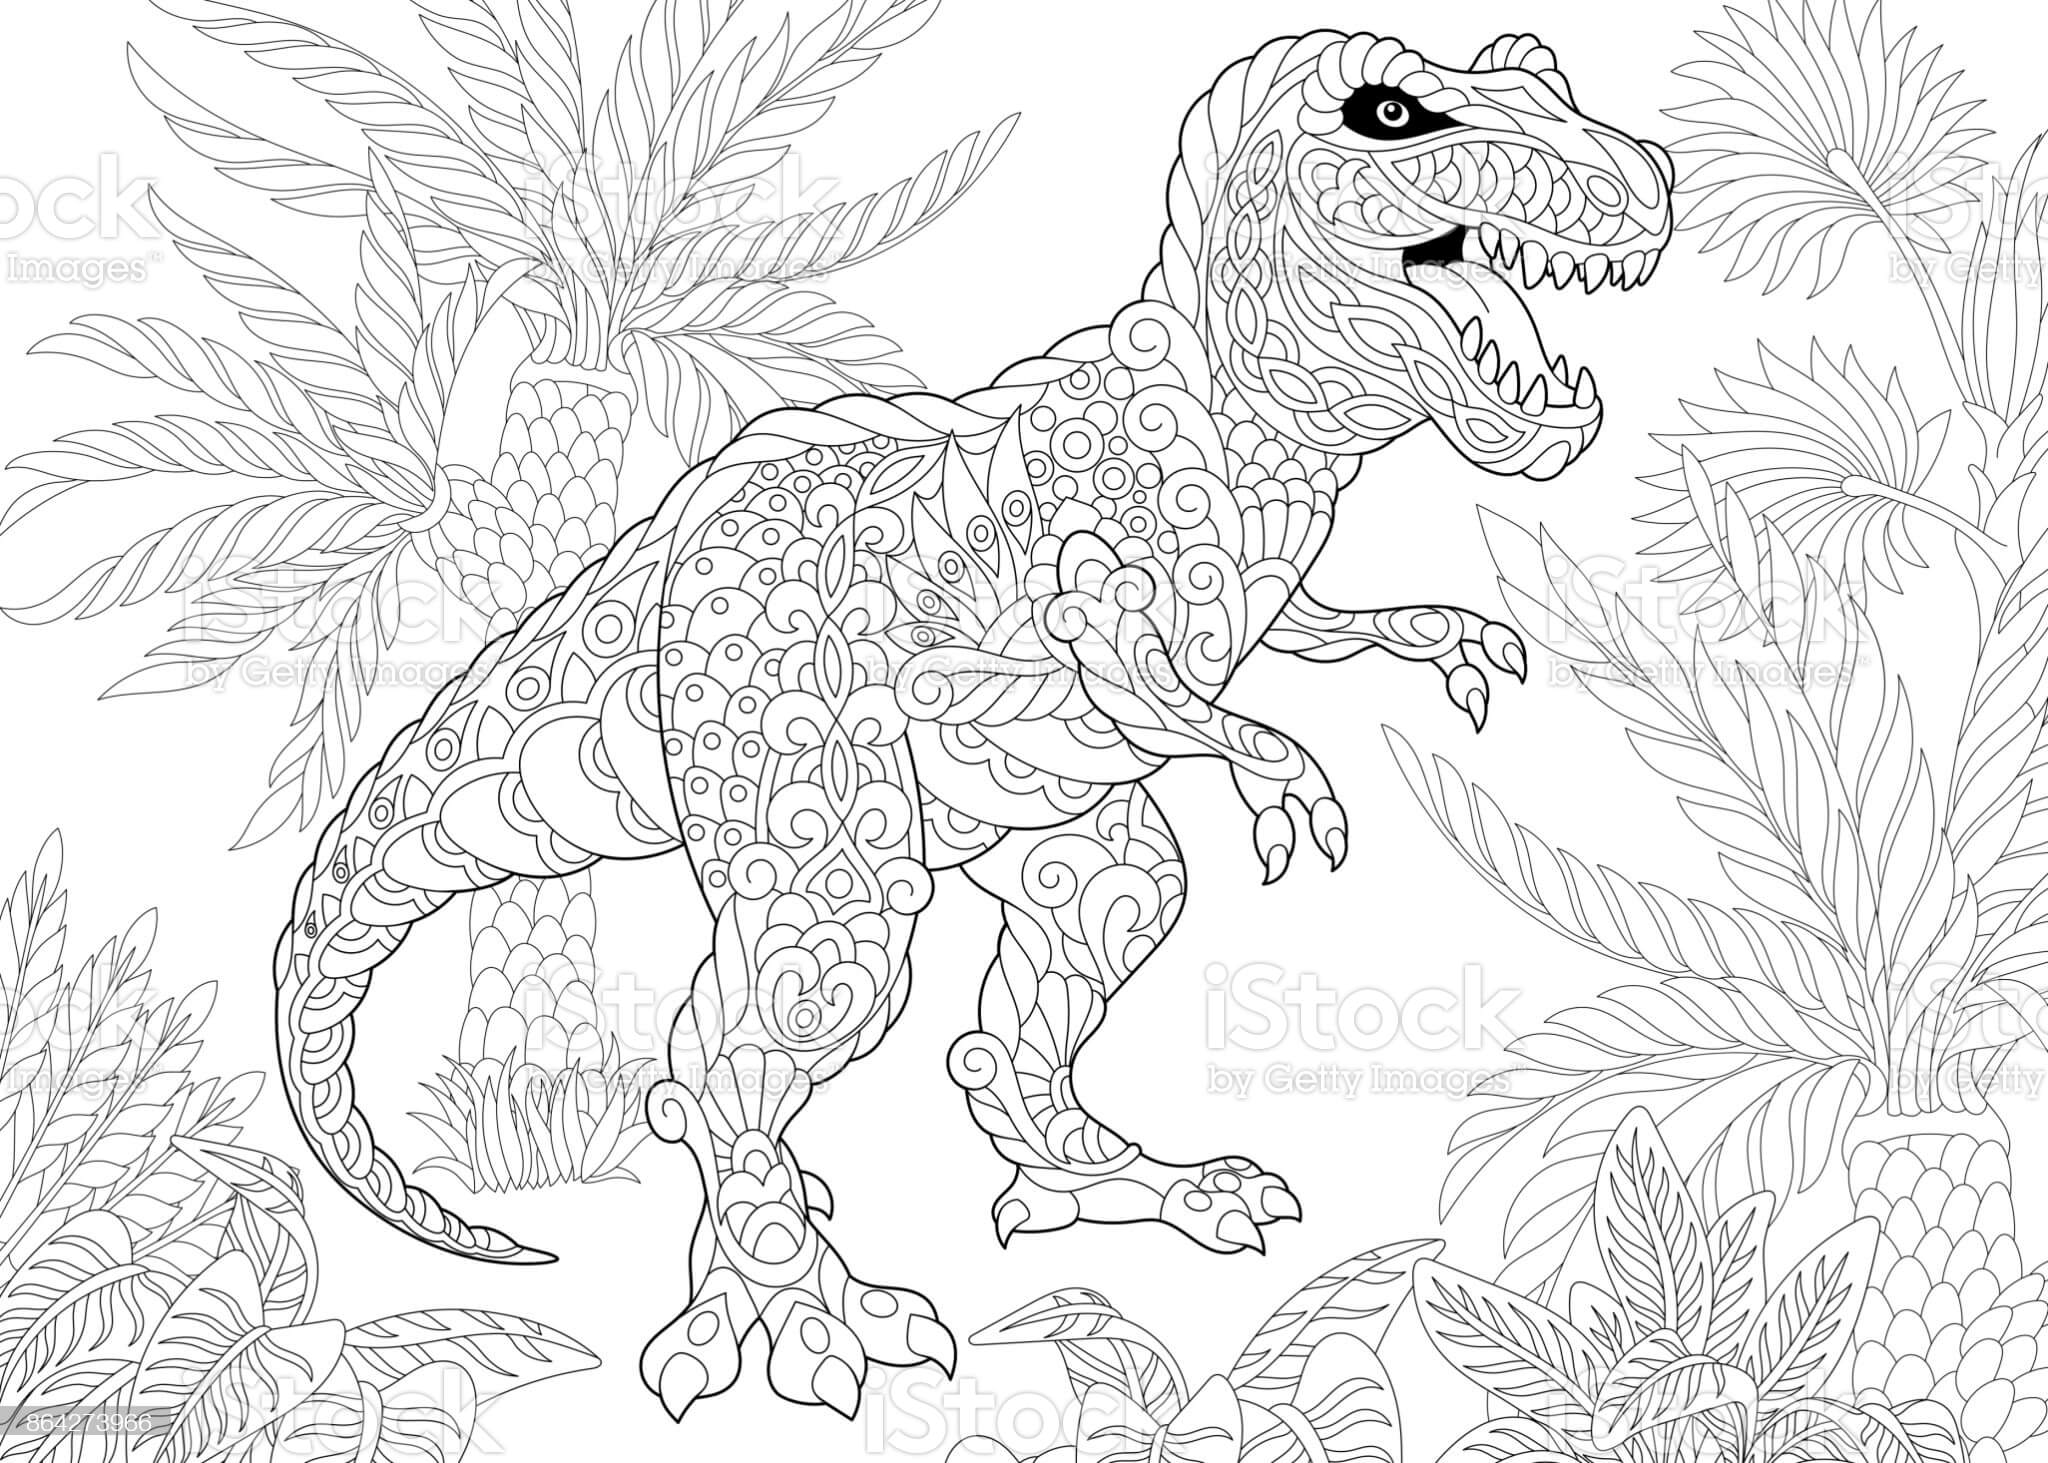 20 Tyrannosaurus Rex T Rex Coloring Pages for All Ages   Happier ...